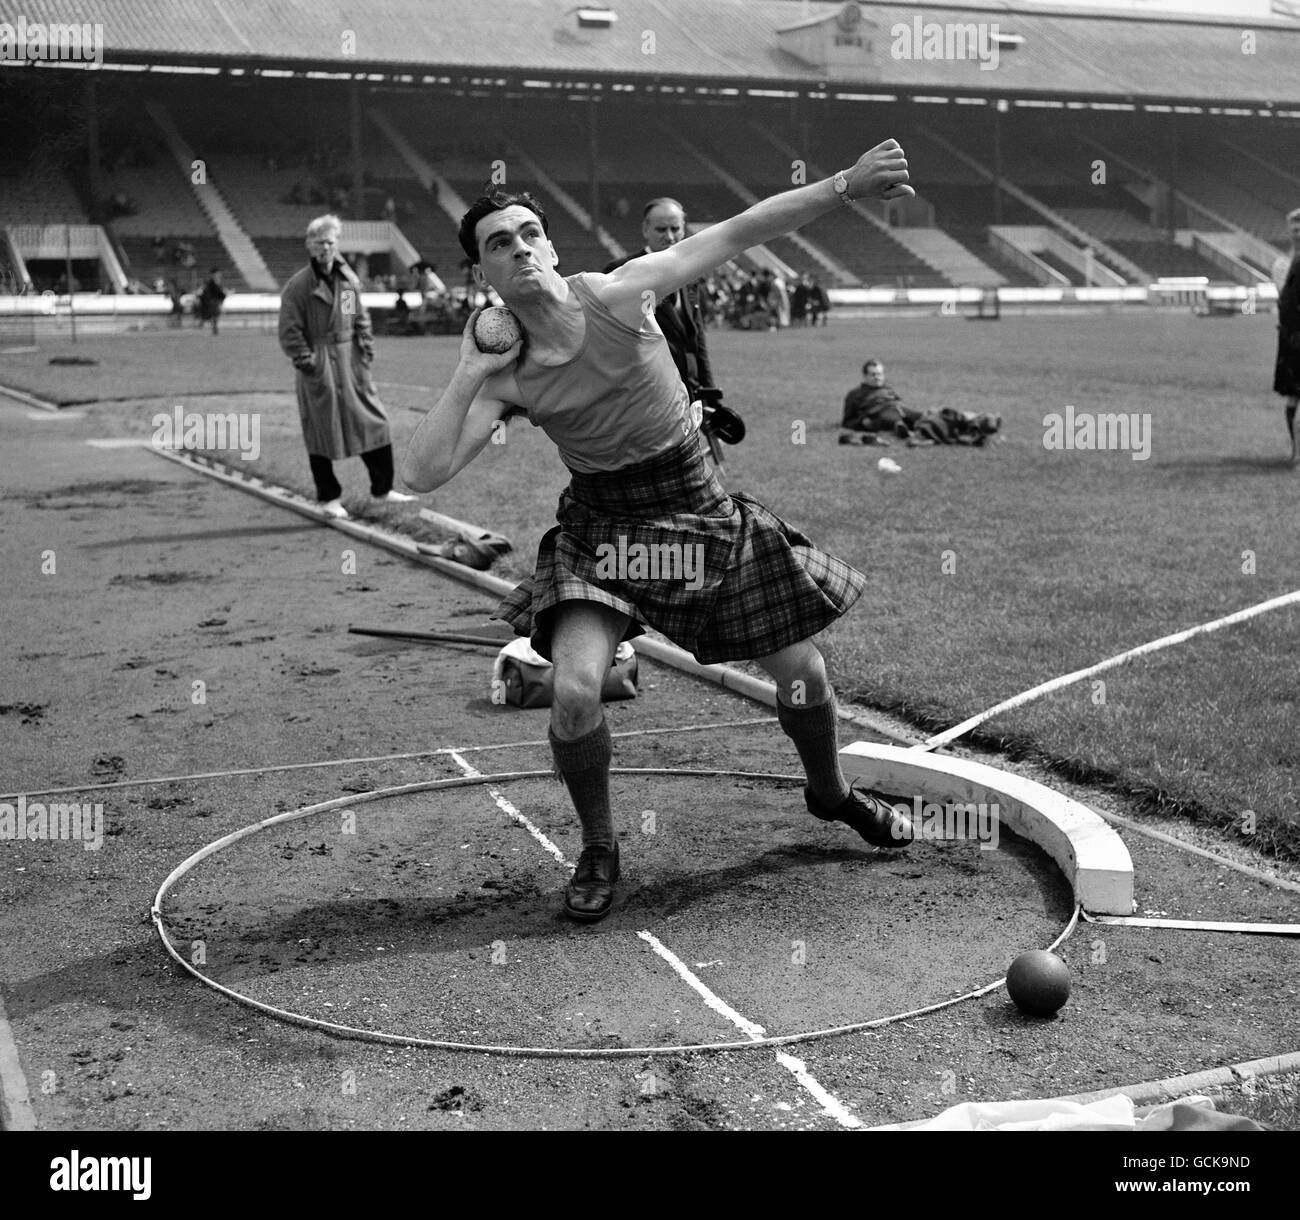 Kenneth MacDonald putting the weight (shot) during the preliminary rounds at The London Caledonian Games at White City. Stock Photo